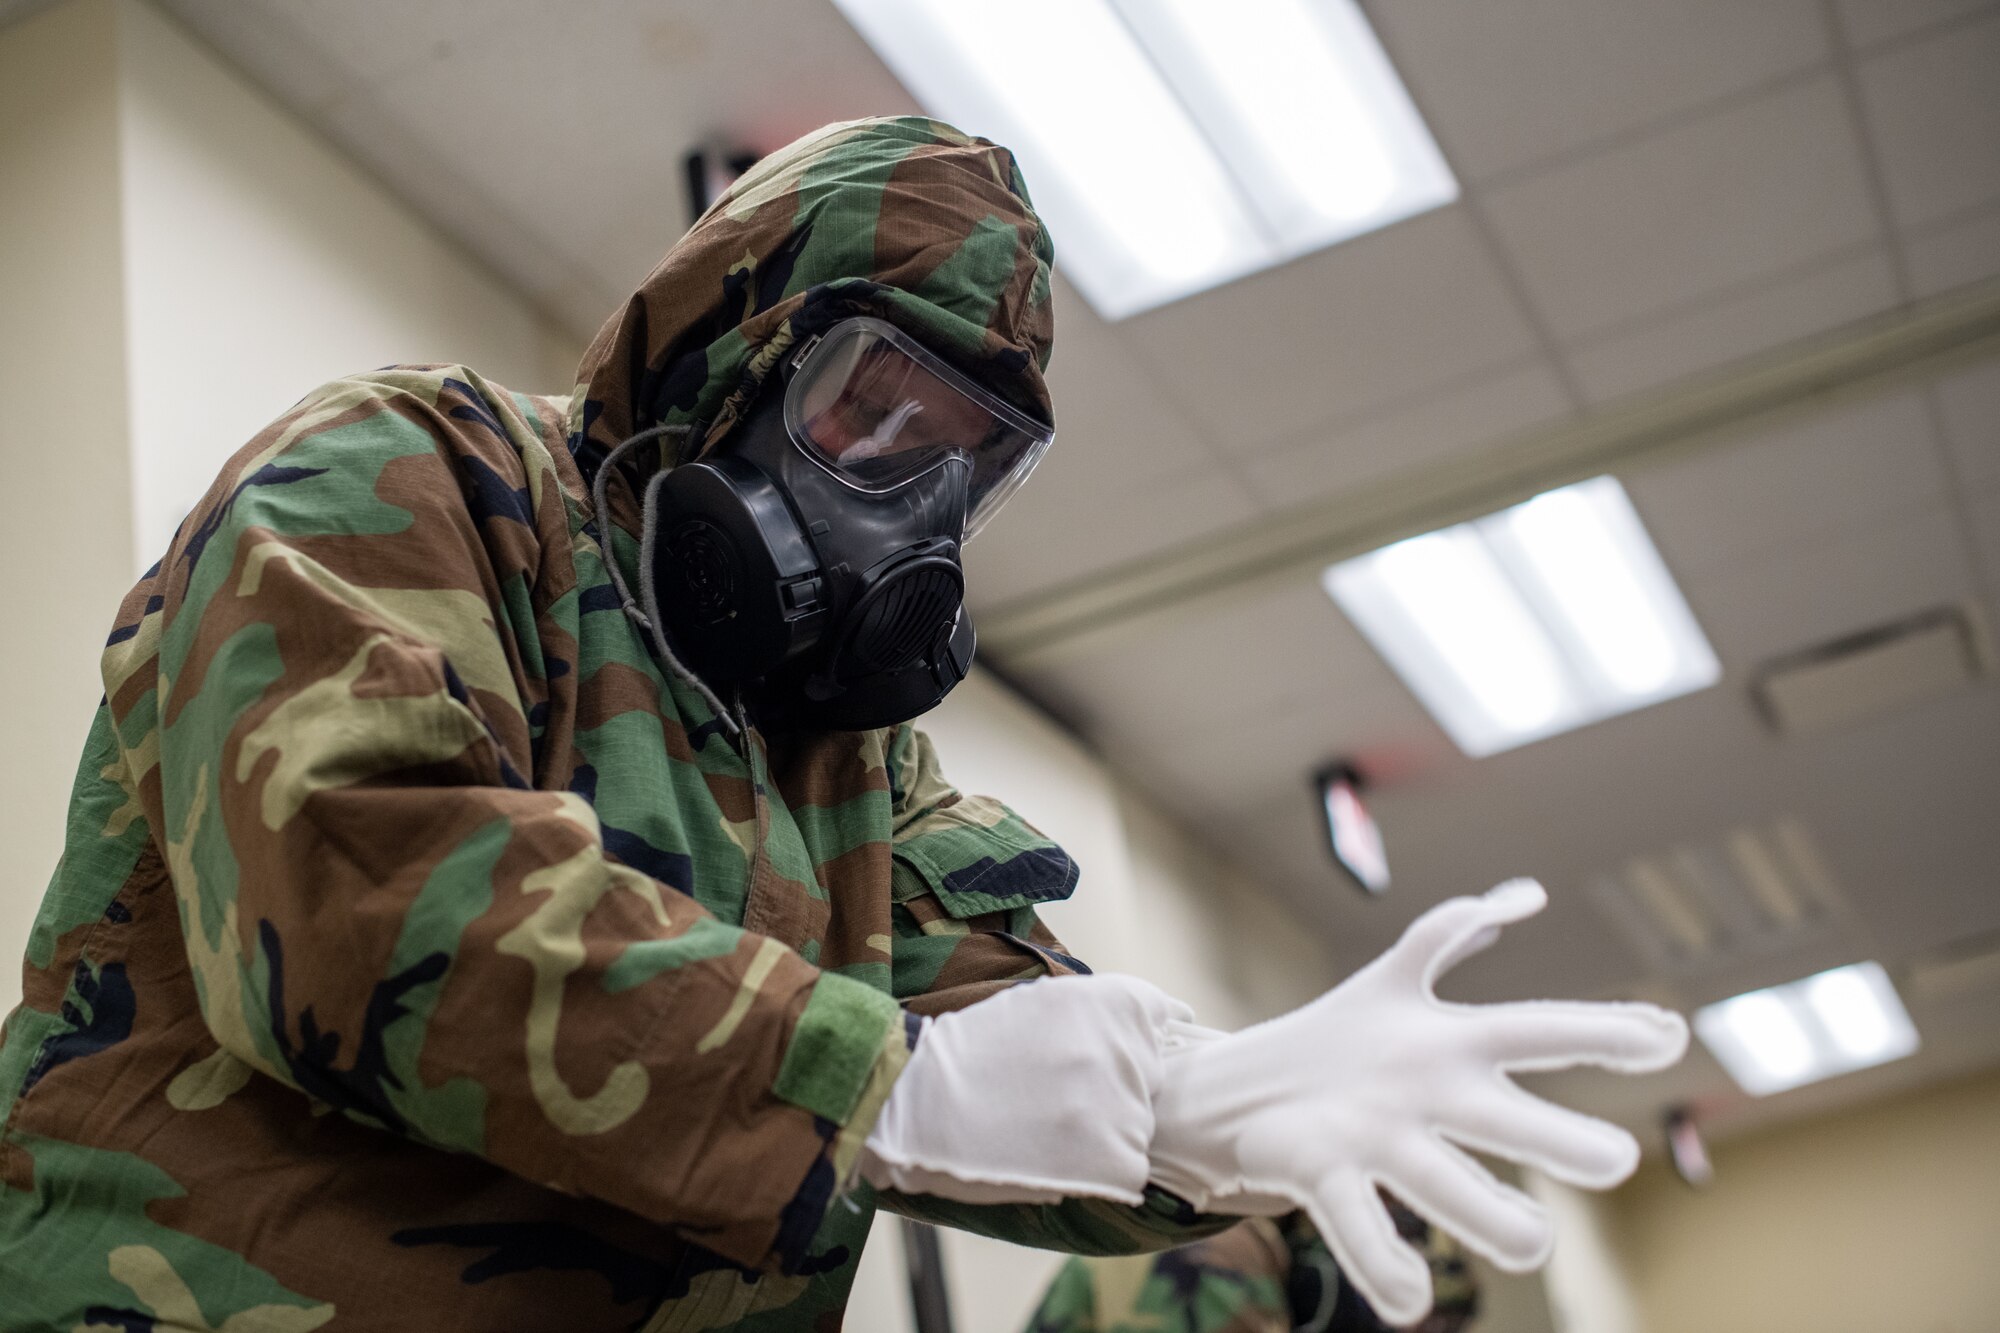 An Airmen in full chemical protective gear puts on a white glove